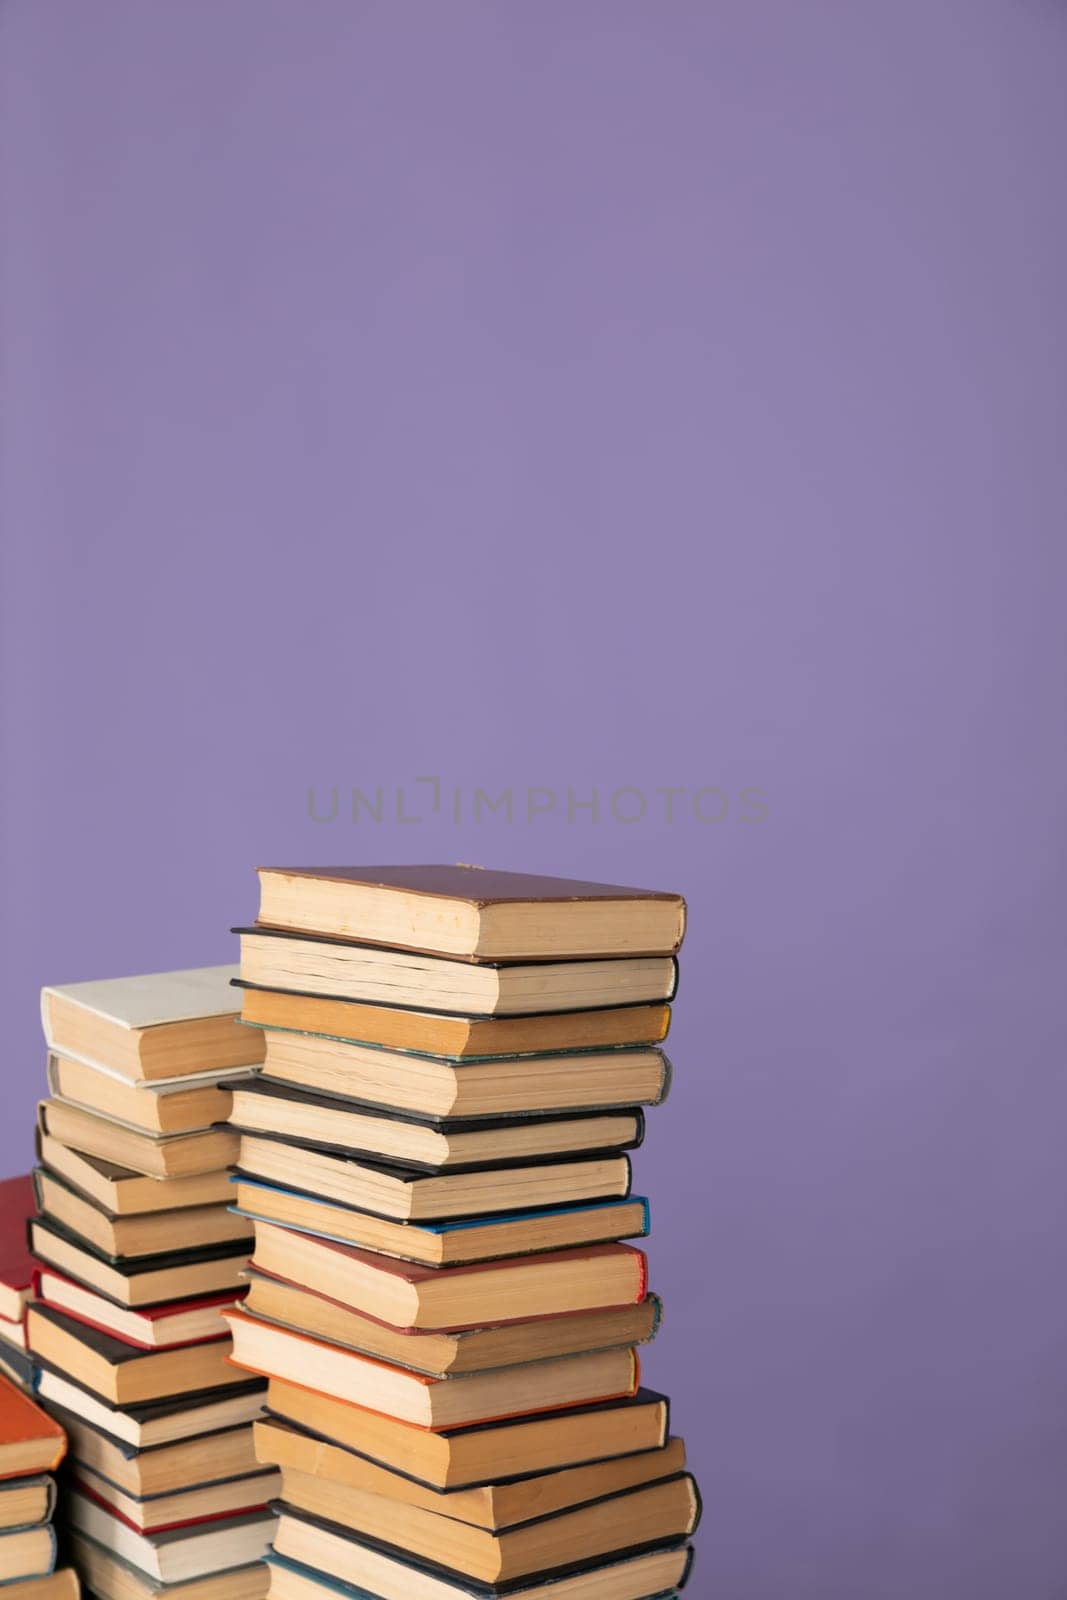 stack of books library for reading and education on a purple background by Simakov